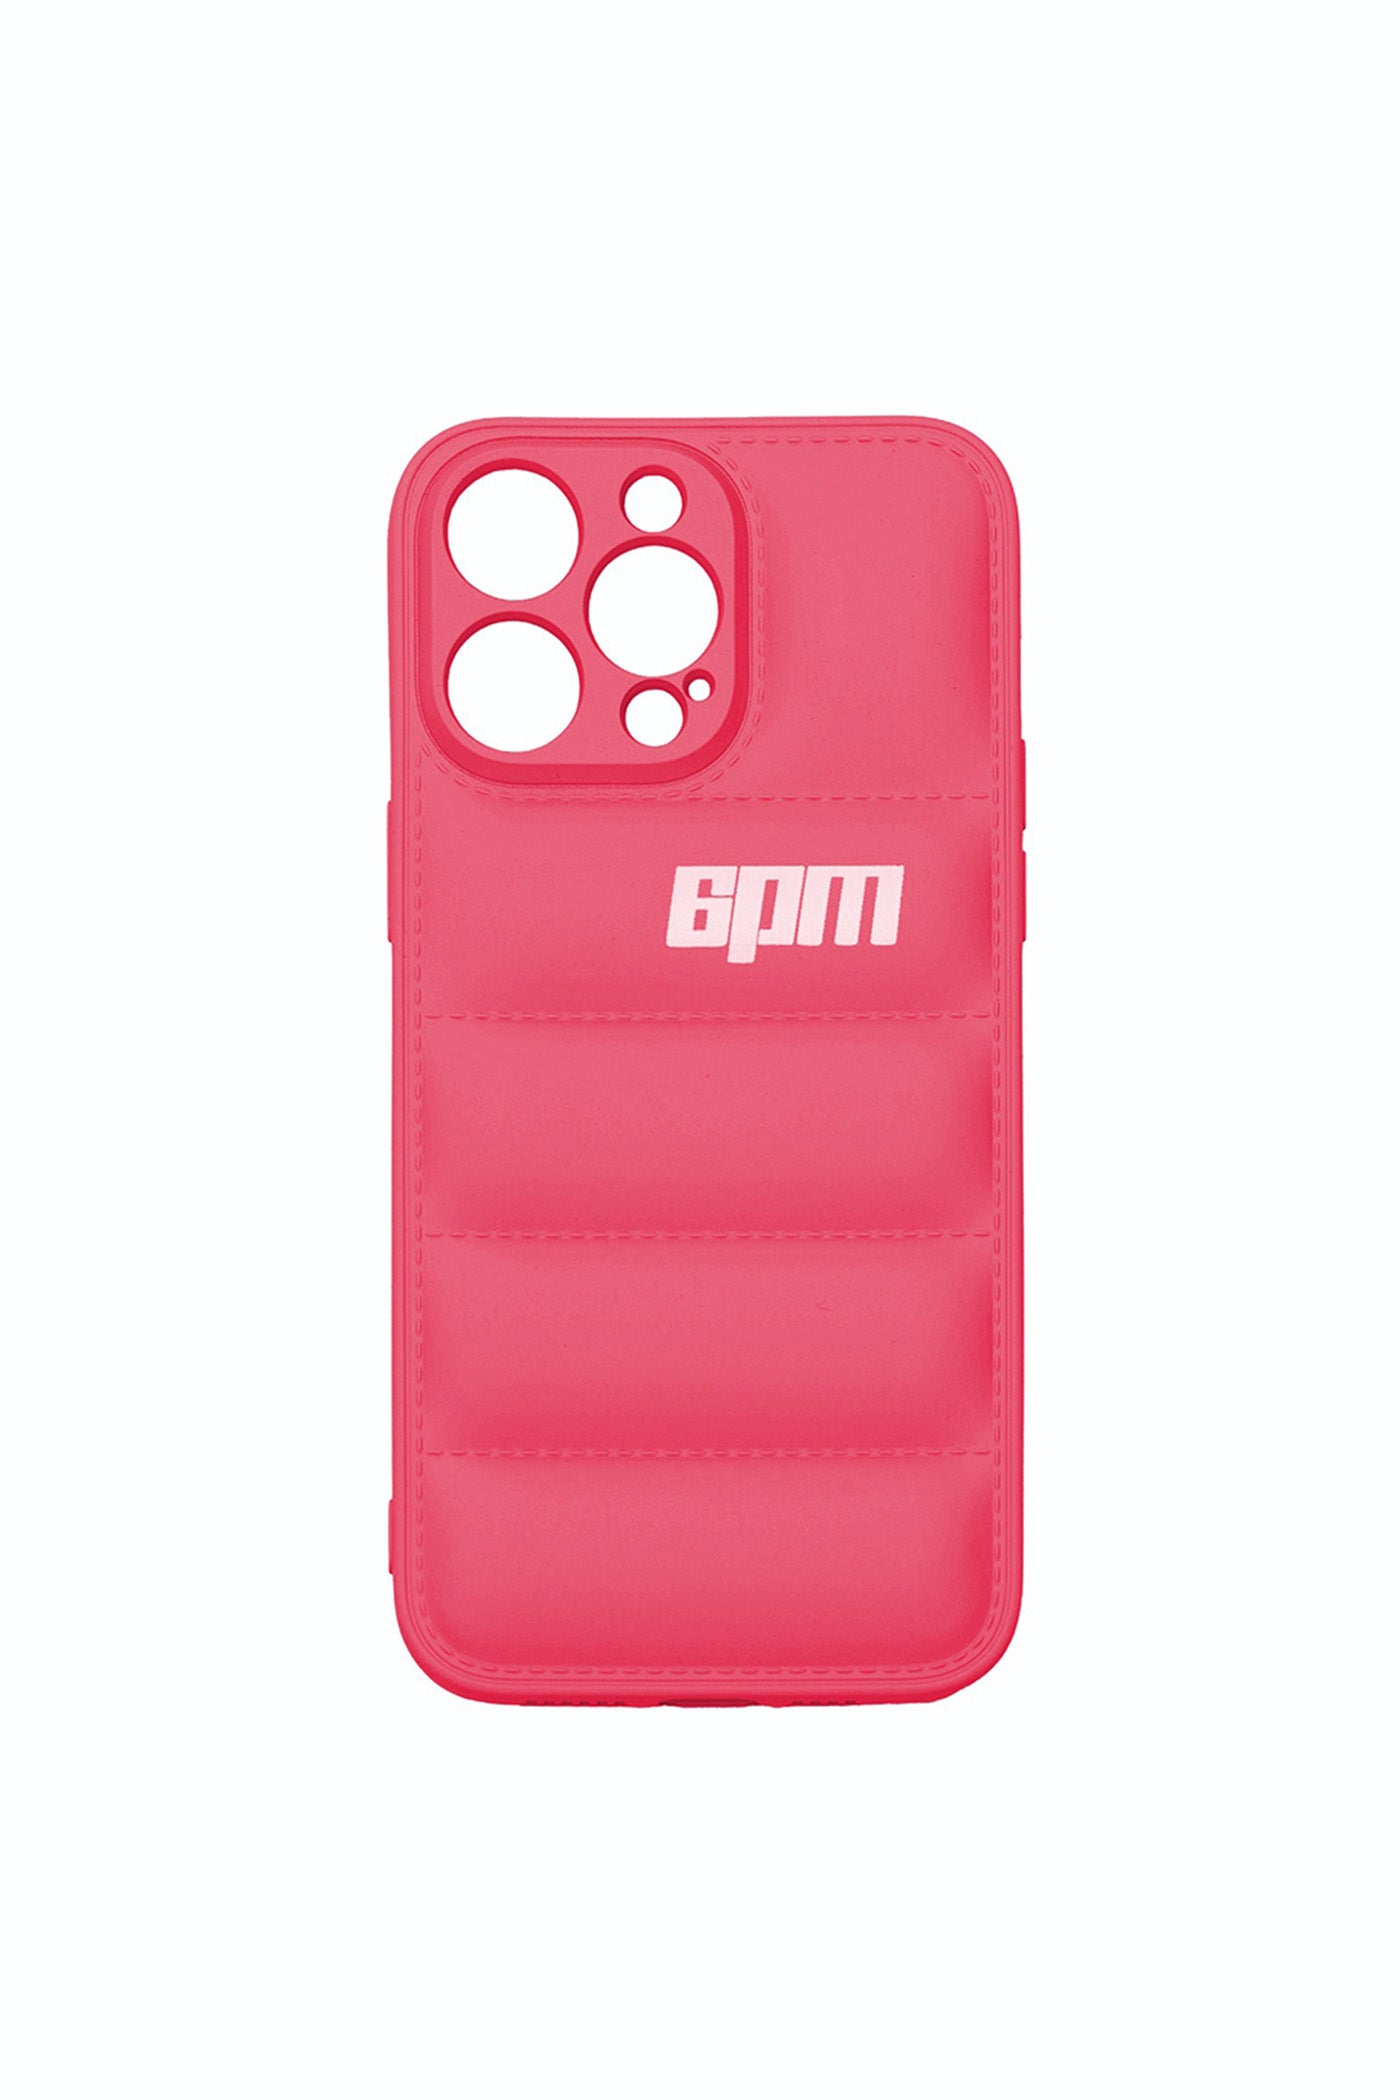 IPHONE CASE HOT PINK